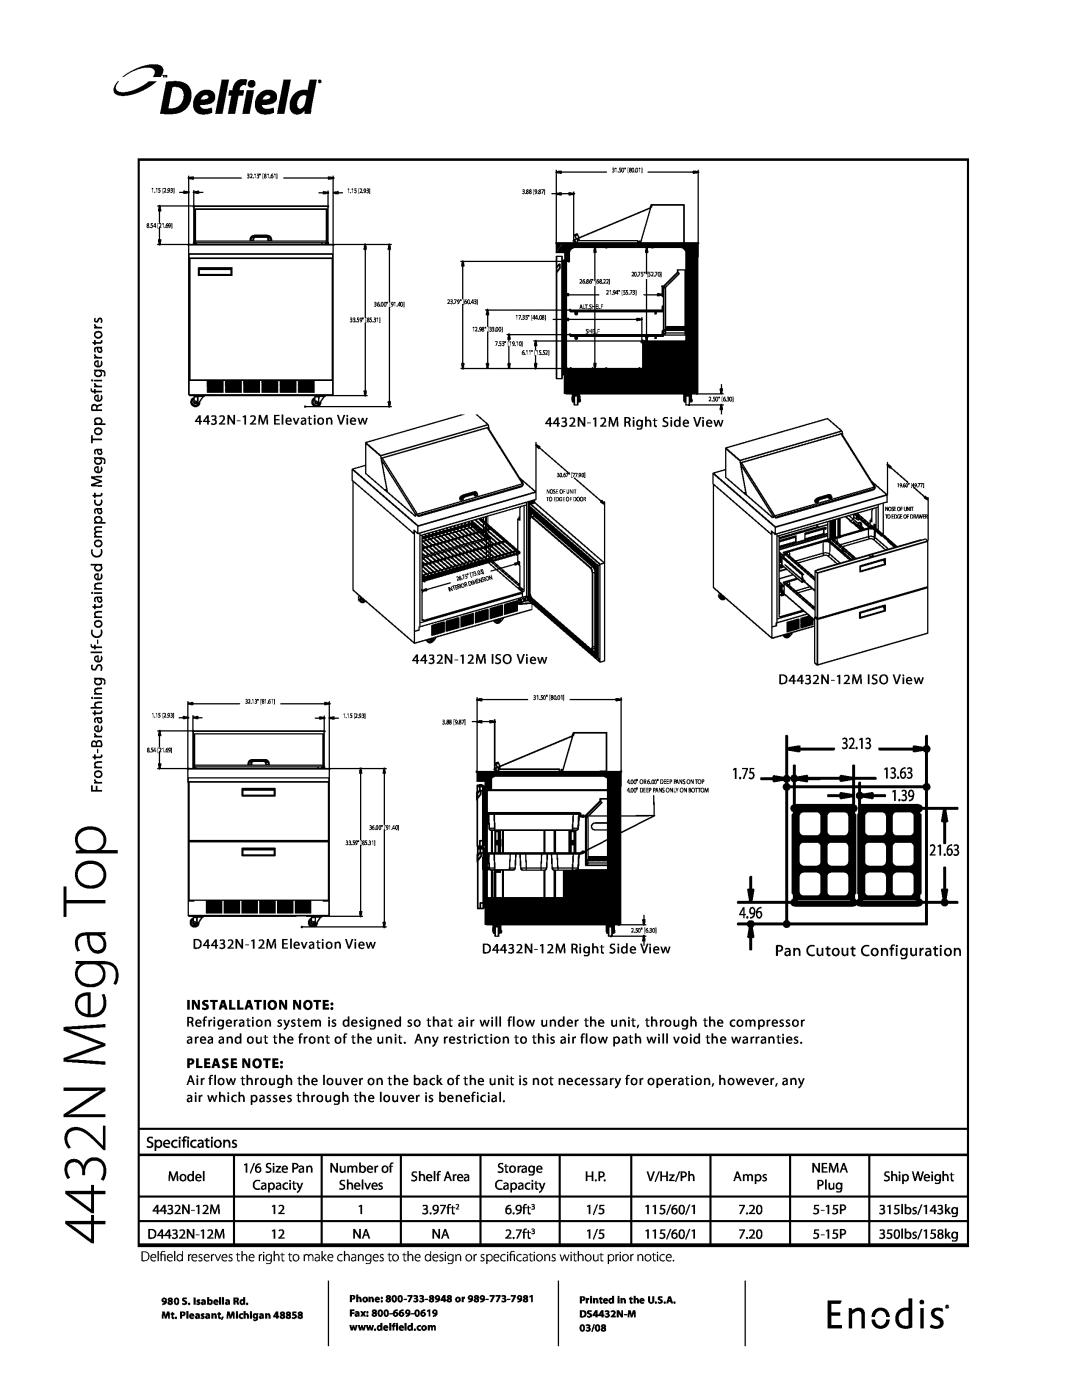 Delfield D4432N-12M Refrigerators, Contained Compact Mega Top, Self, Top Front-Breathing, Pan Cutout Configuration,  